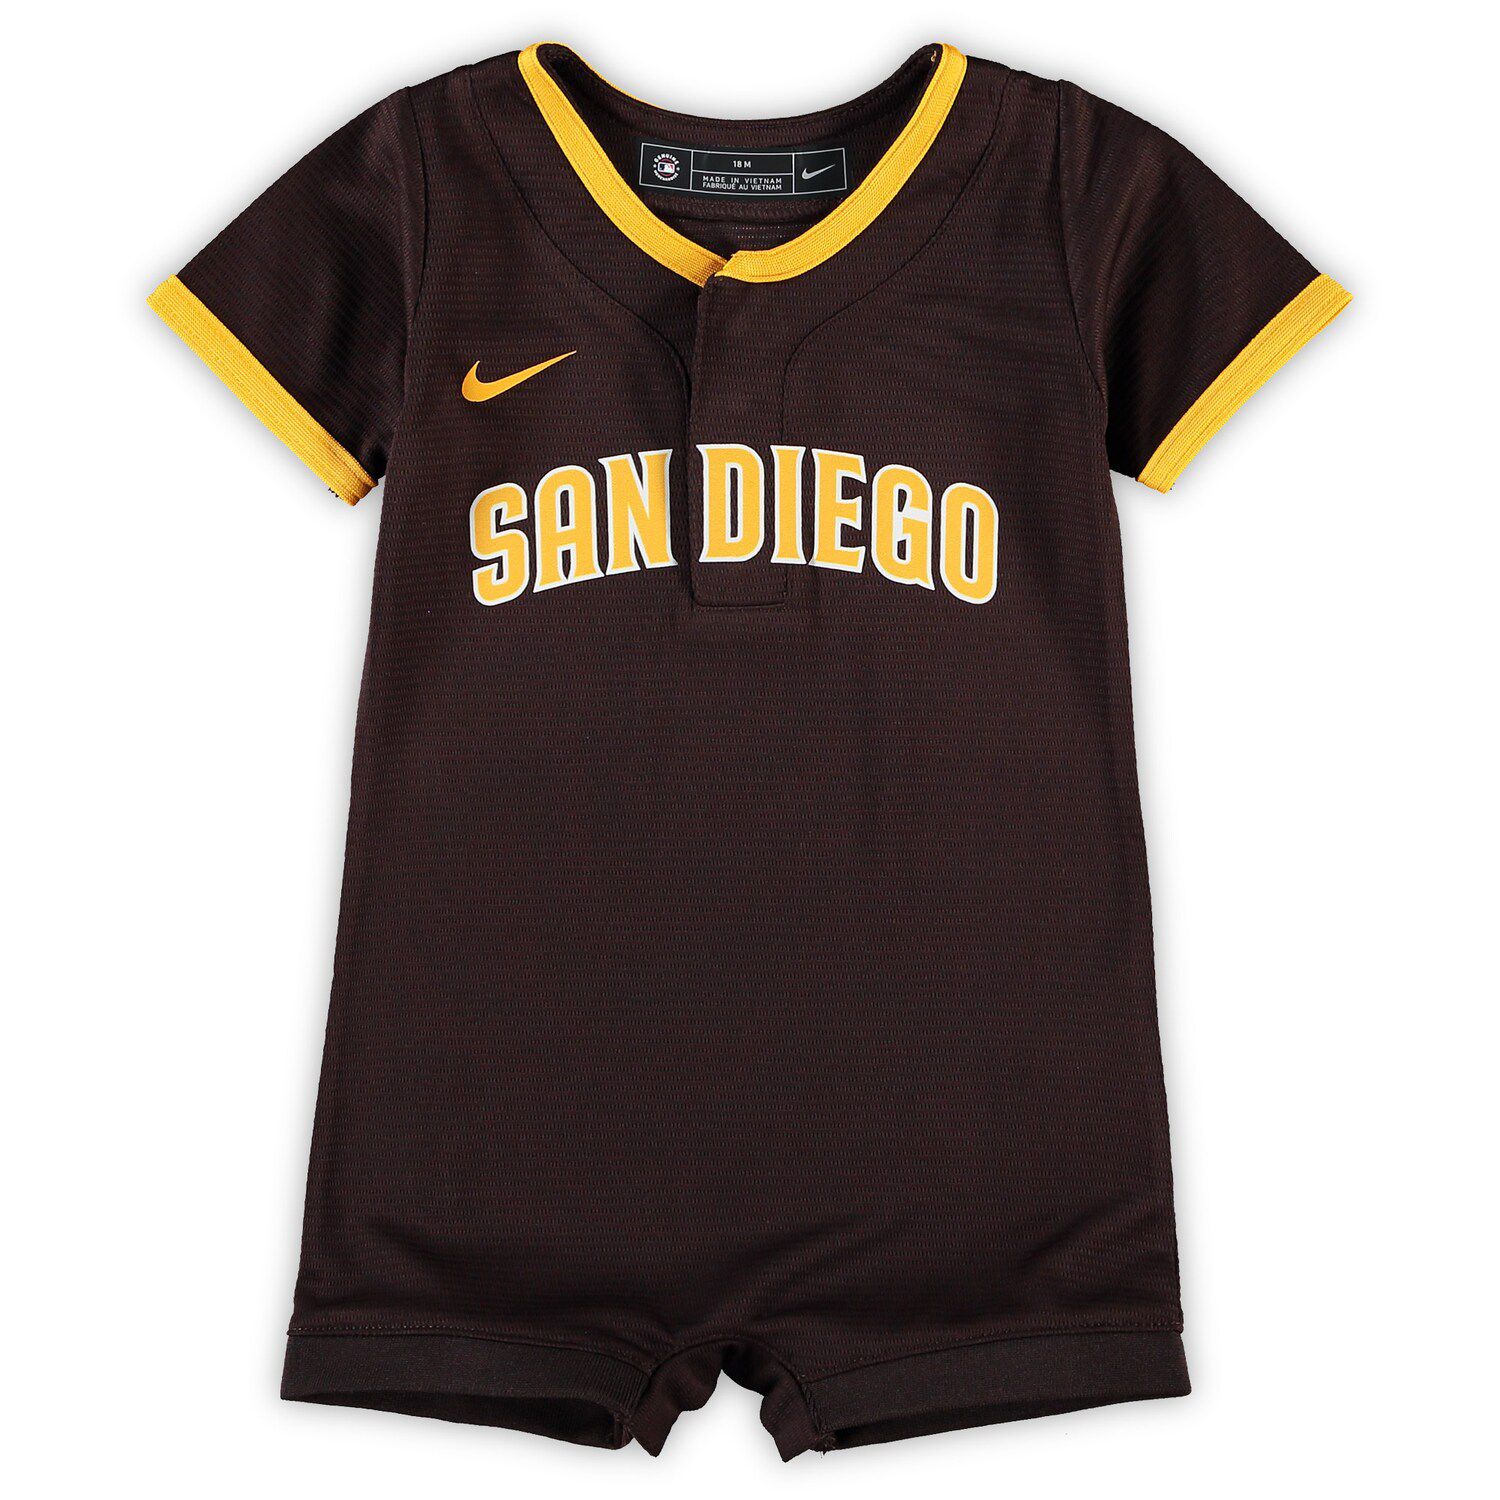 baby padres jersey